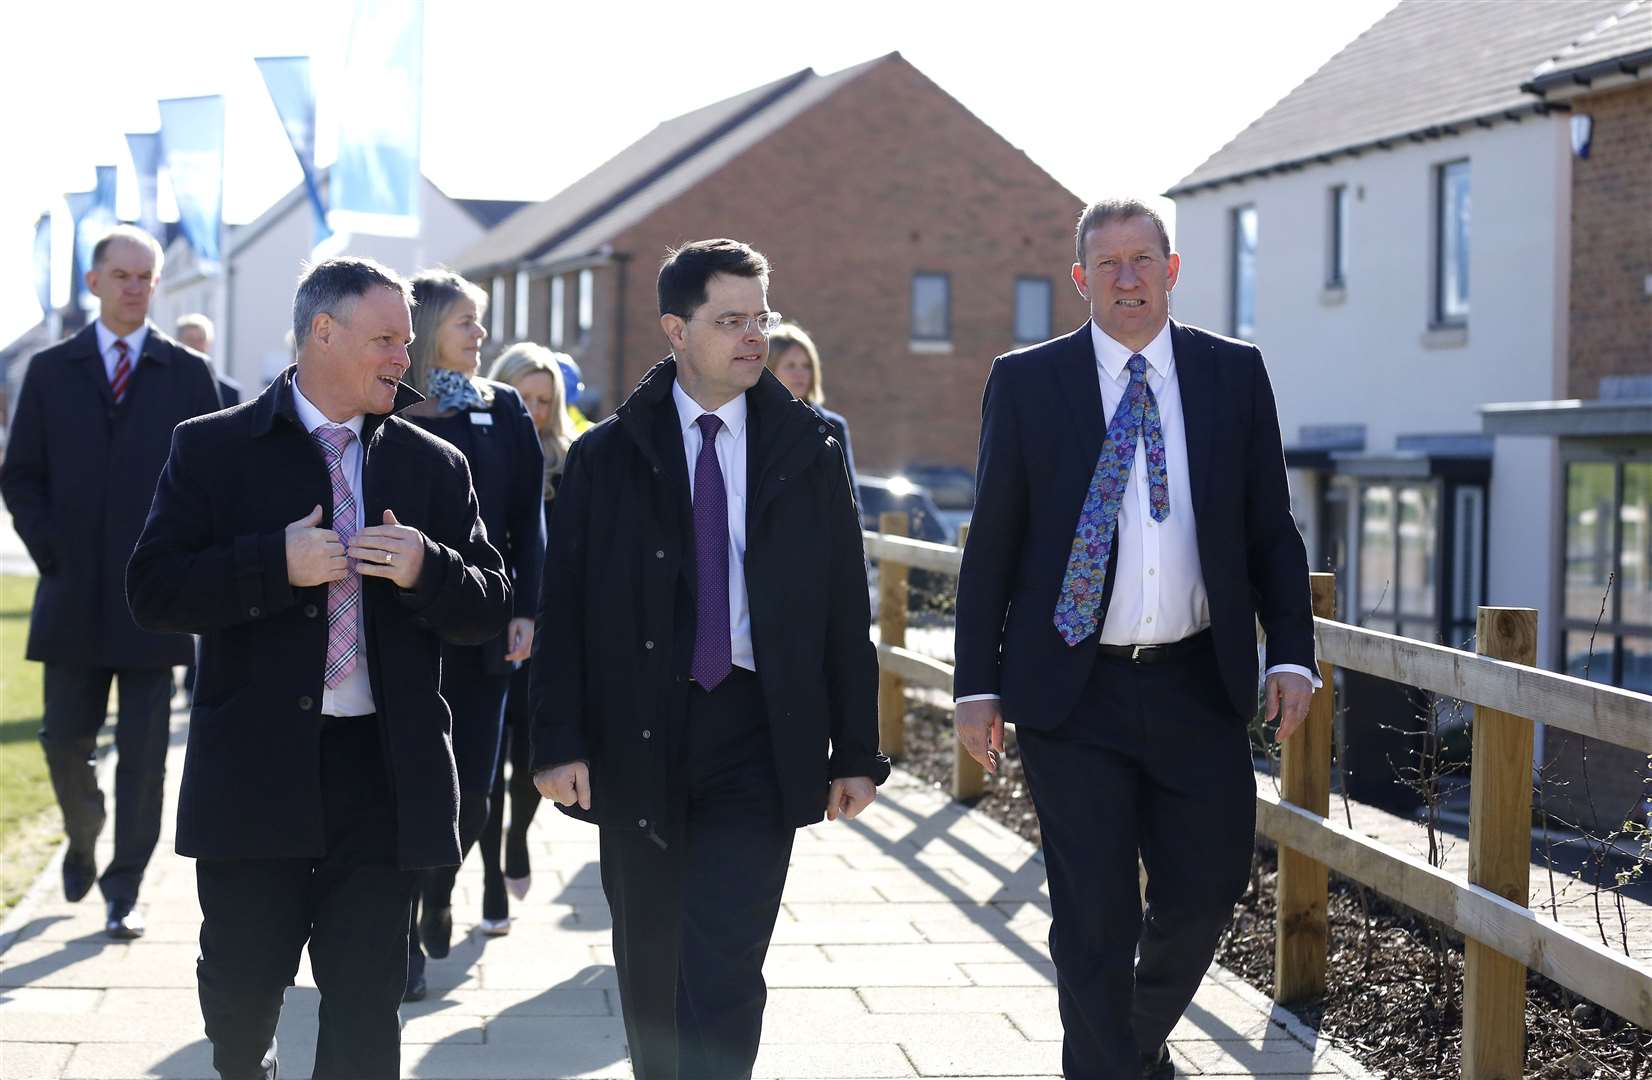 Local government minister James Brokenshire on a visit to Kent